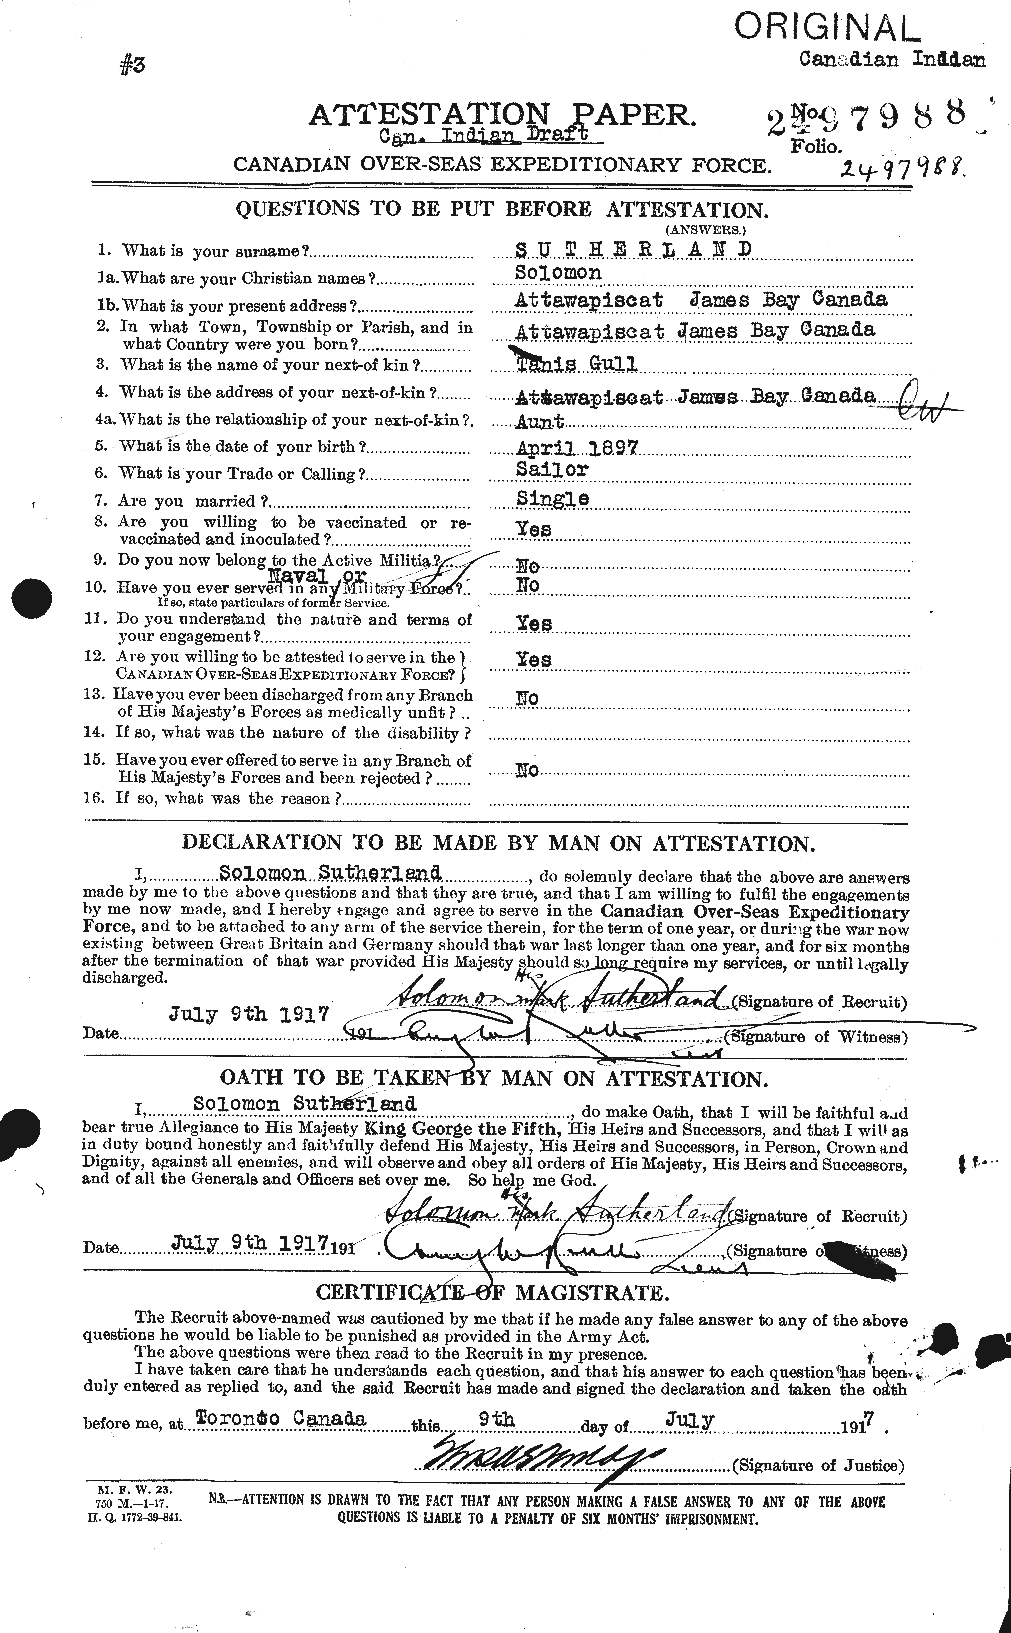 Personnel Records of the First World War - CEF 126557a